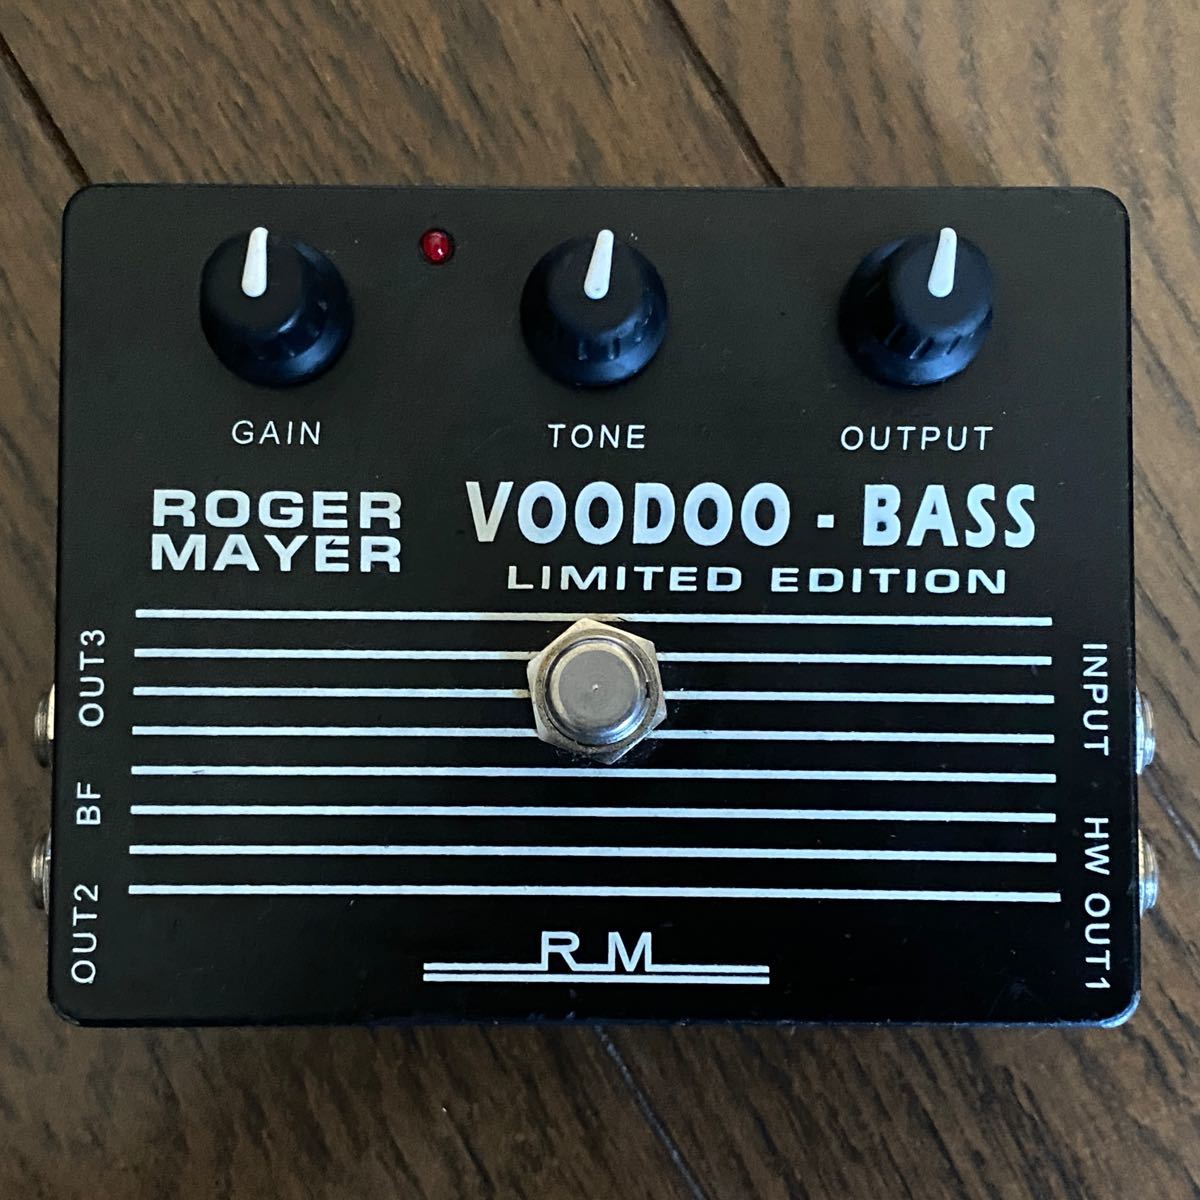 Roger Mayer Voodoo Bass Limited Edition